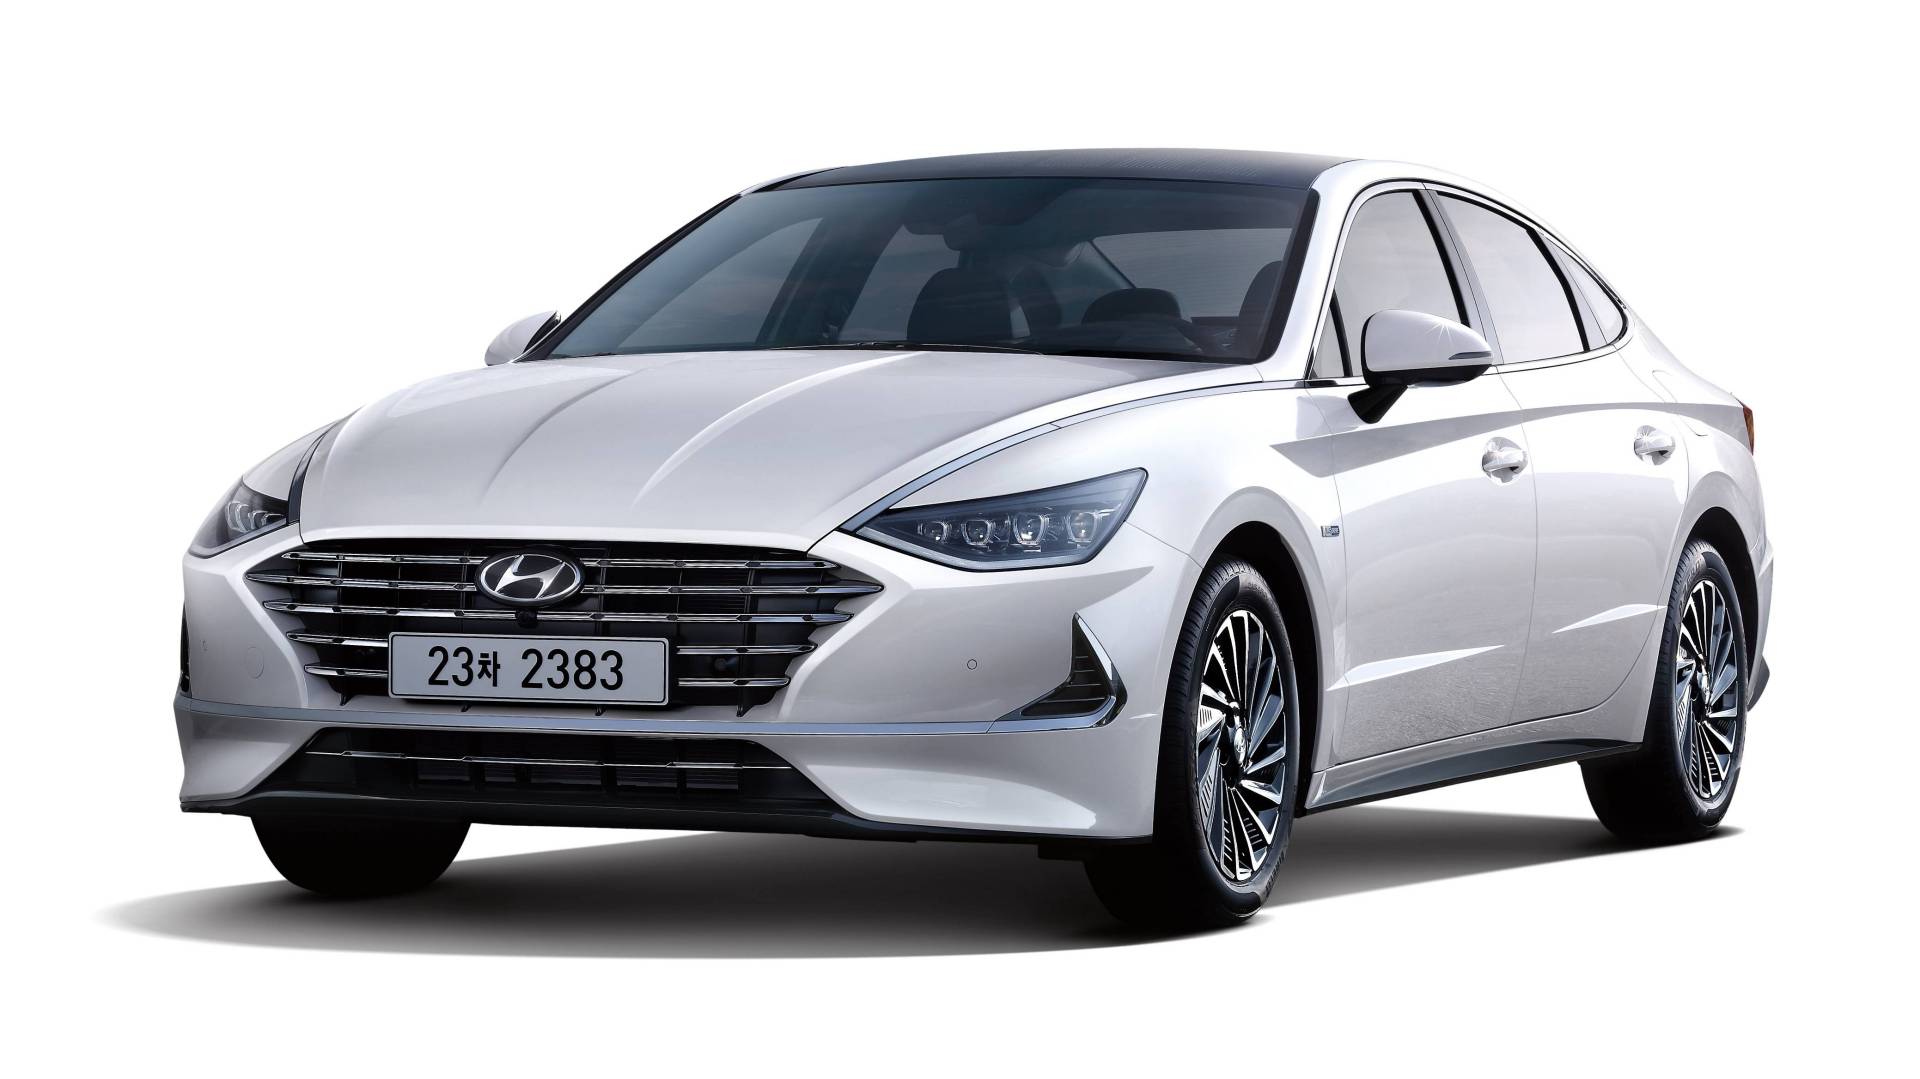 hyundai announces an eco friendly model for chicago could be the 2020 sonata hybrid carscoops hyundai announces an eco friendly model